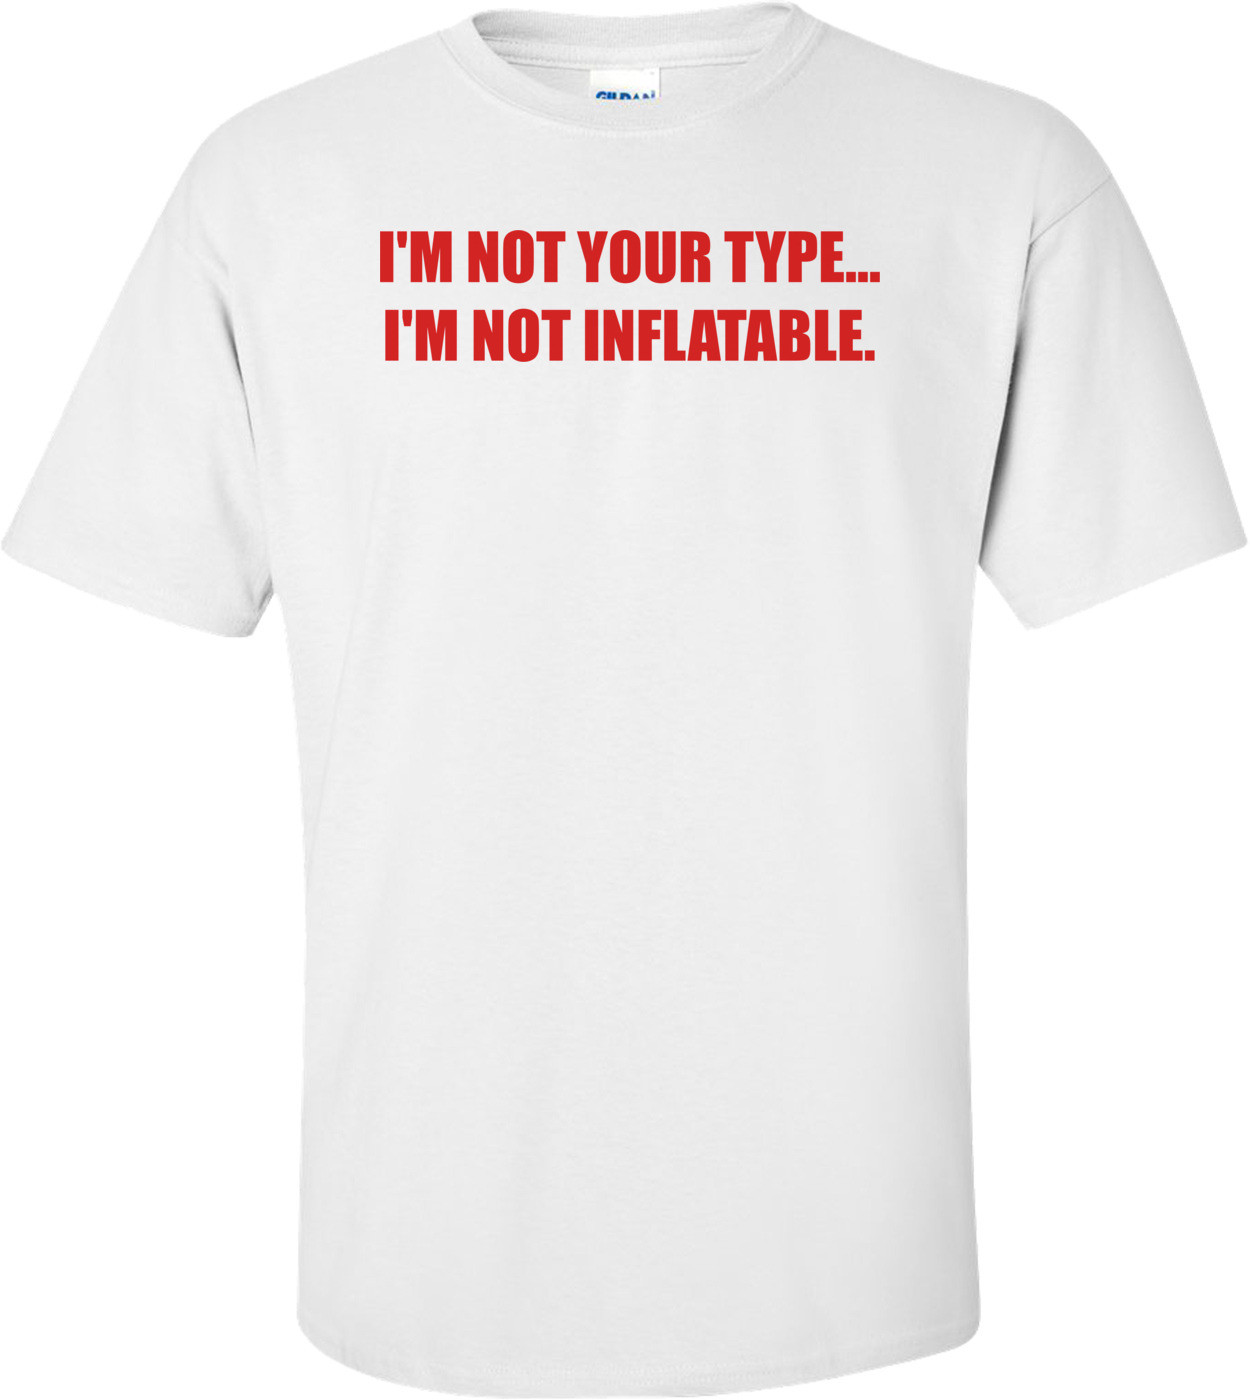 I'M NOT YOUR TYPE... I'M NOT INFLATABLE. Shirt